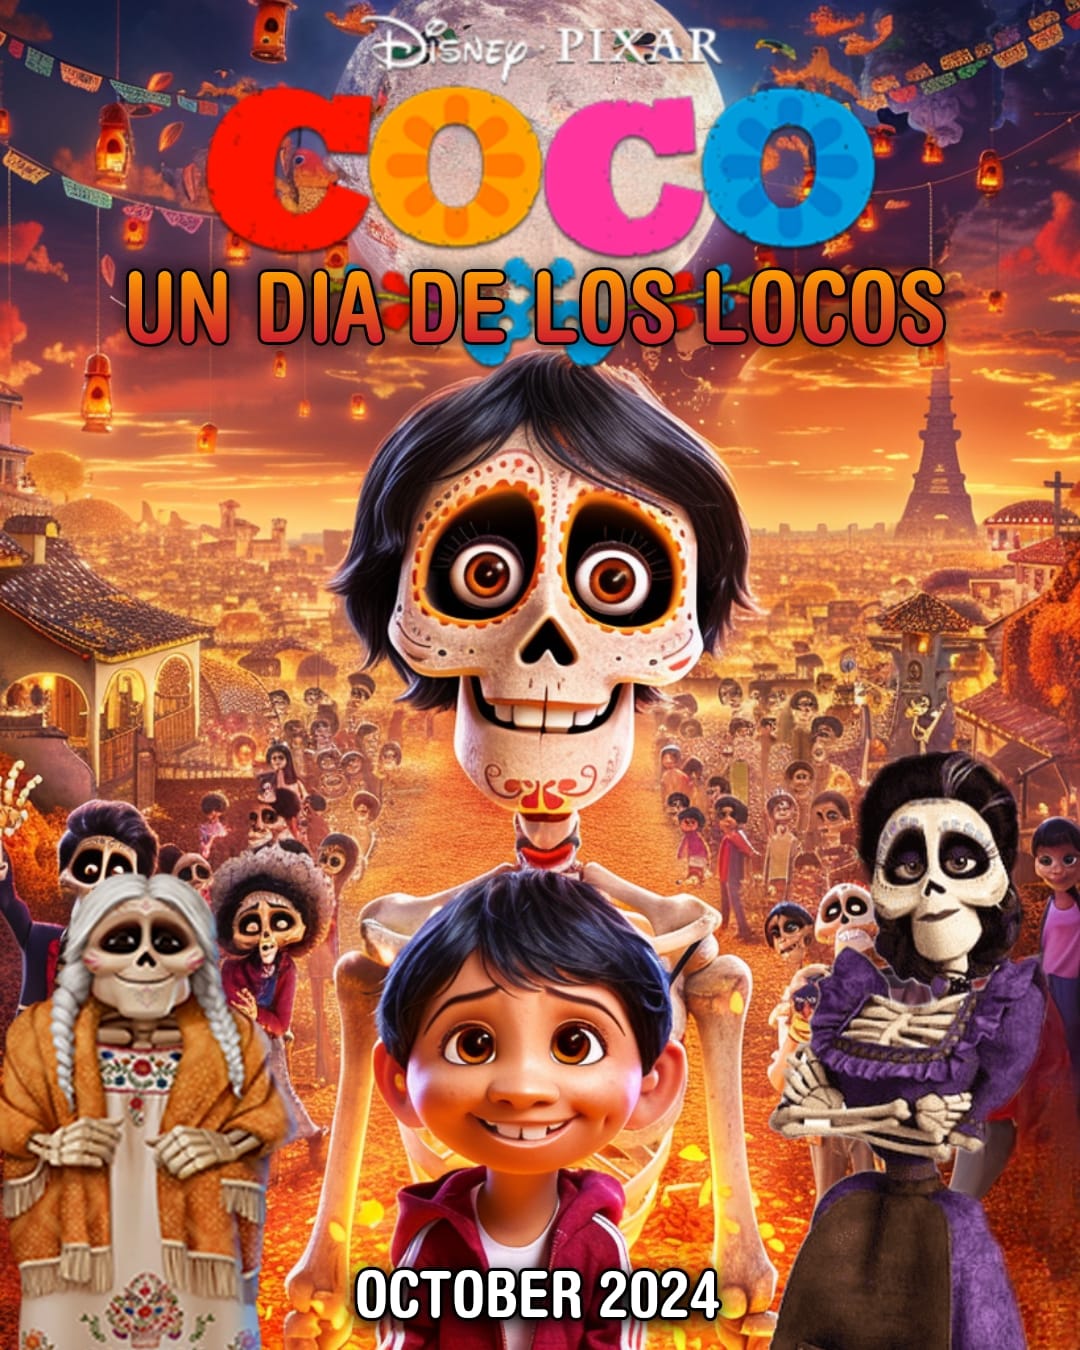 Is Coco 2 On The Way Now? Have Disney Or Pixar Confirmed?